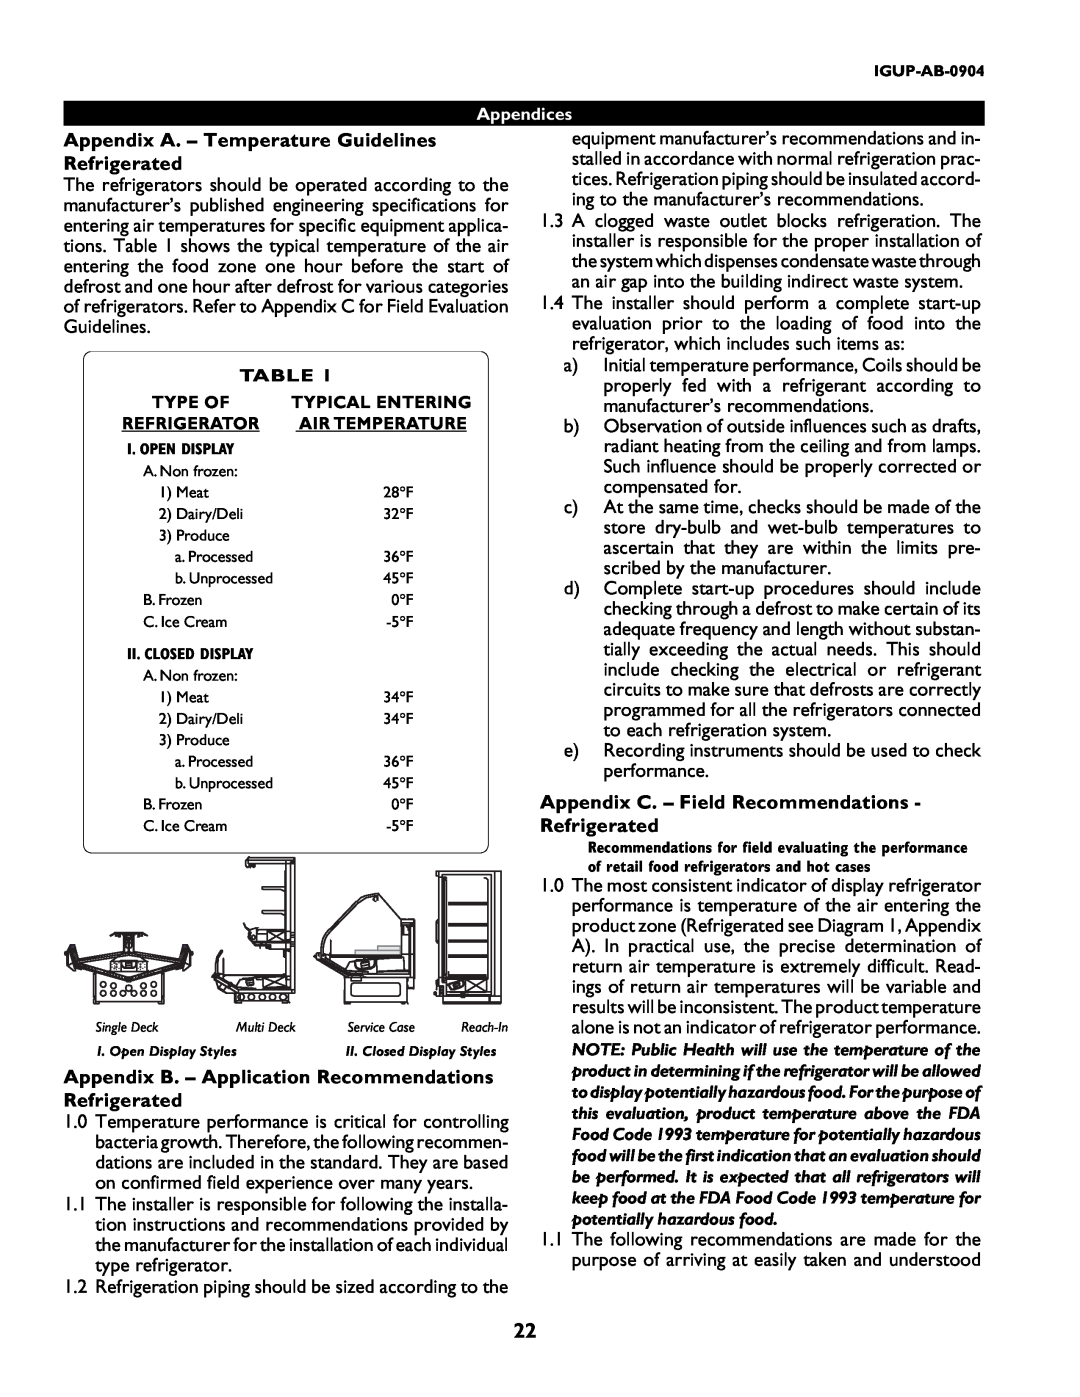 hussman P/N IGUP-AB-0904 operation manual Appendix A. – Temperature Guidelines Refrigerated, Appendices 